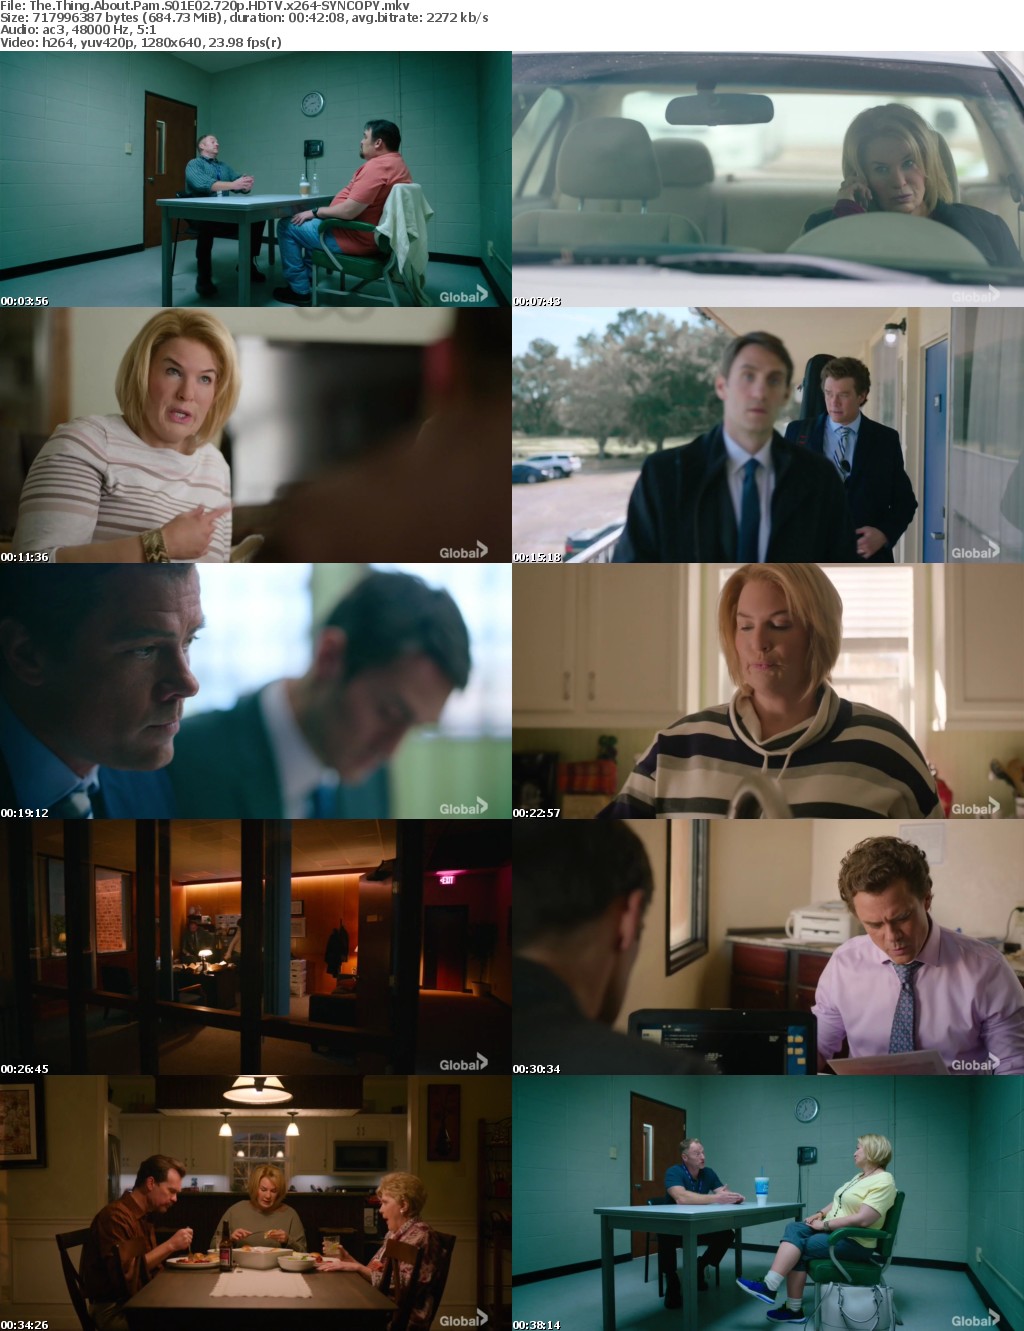 The Thing About Pam S01E02 720p HDTV x264-SYNCOPY